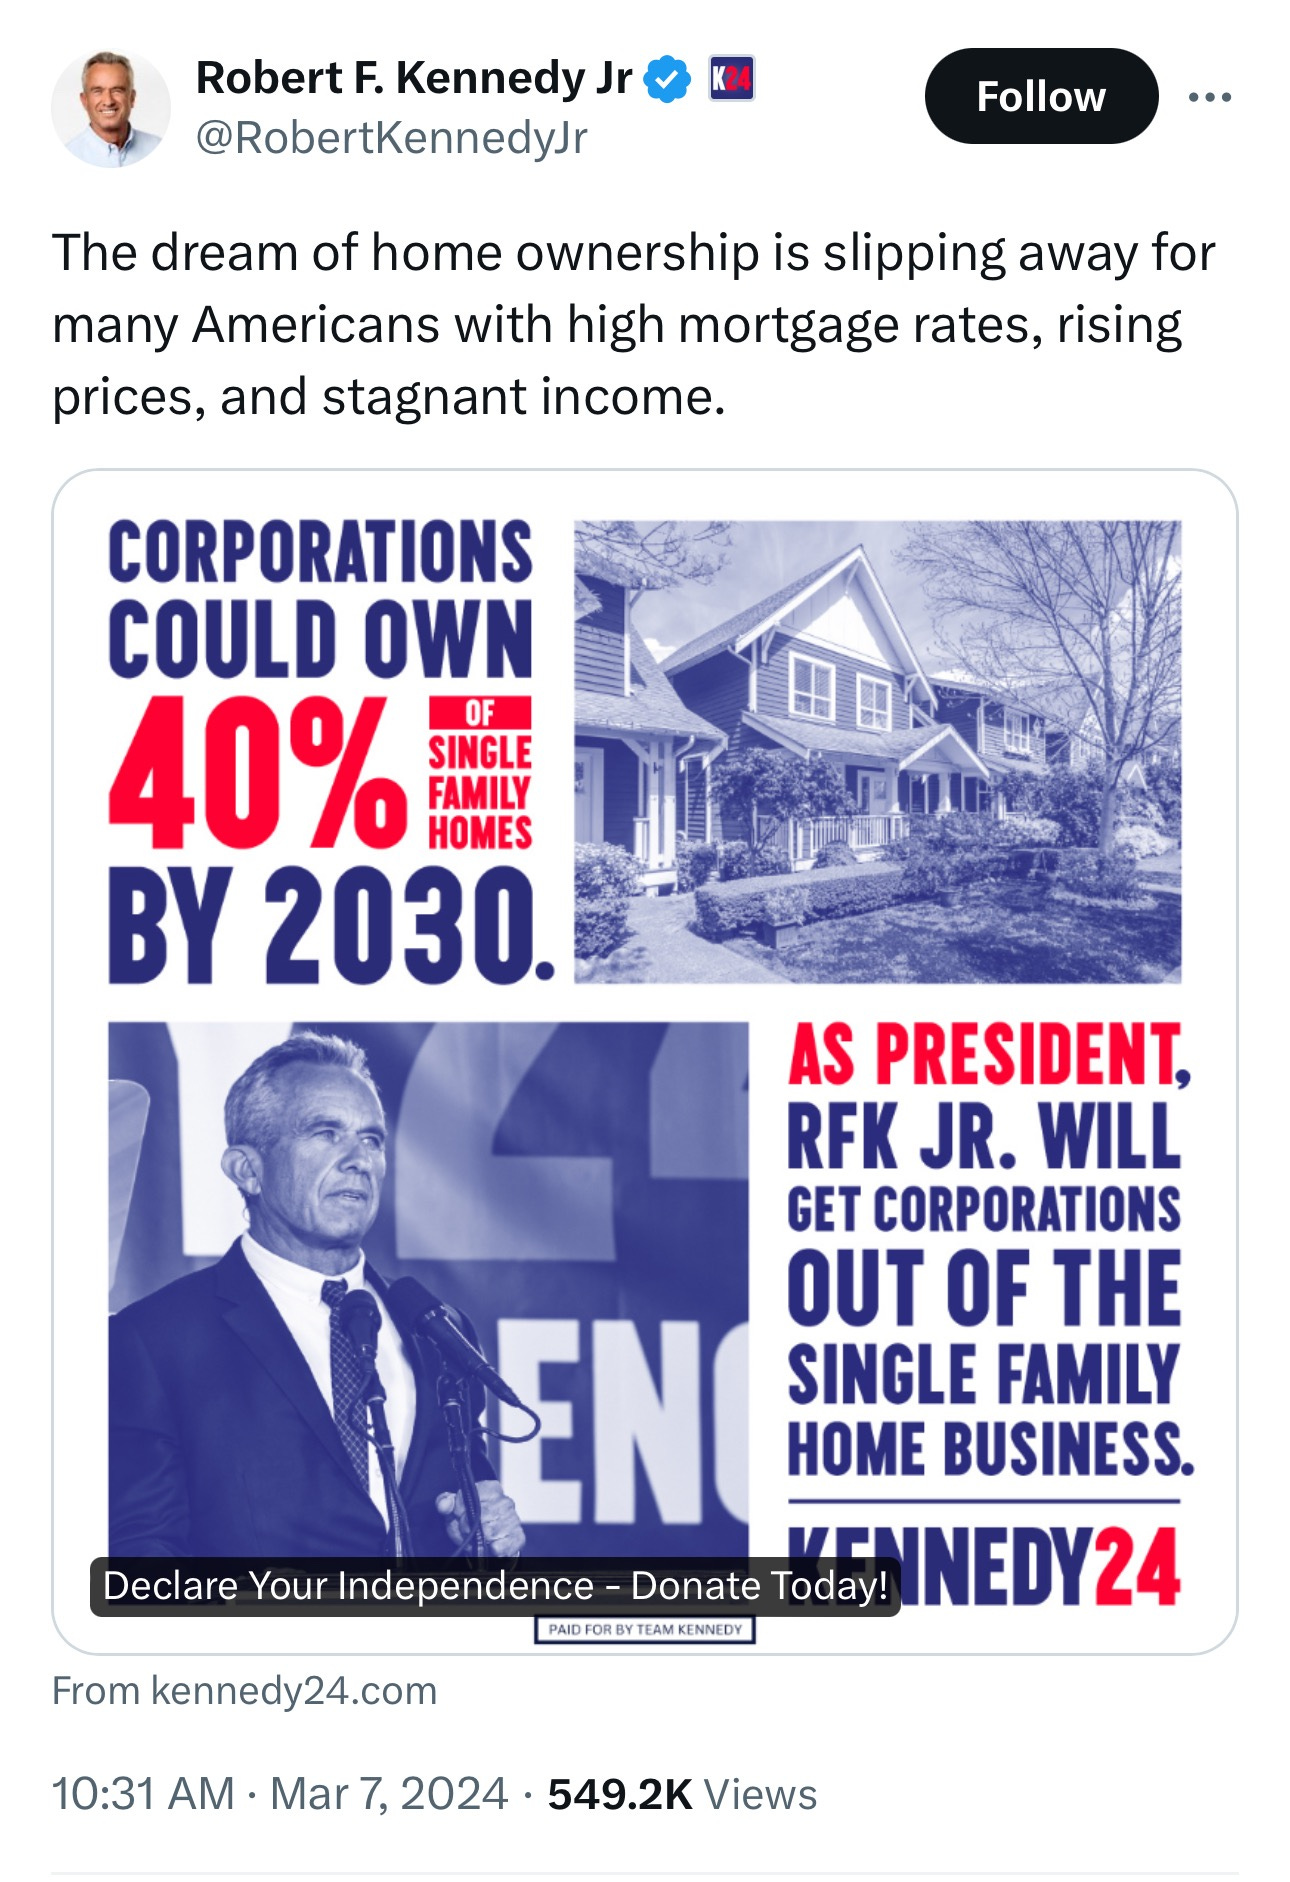 May be a graphic of 2 people and text that says 'RobertF. Kennedy Jr @RobertKennedyJr Follow The dream of home ownership is slipping away for many Americans with high mortgage rates, rising prices, and stagnant income. CORPORATIONS COULD OWN 40% FAMILY OF SINGLE HOMES BY 2030. AS PRESIDENT, RFK JR. WILL GET CORPORATIONS OUT OF THE EN SINGLE FAMILY HOME BUSINESS. Declare Your Independence Donate Today! NNEDY24 PAIDEKEND From kennedy 24.com 10:31 AM Mar 2024 549.2K Views'